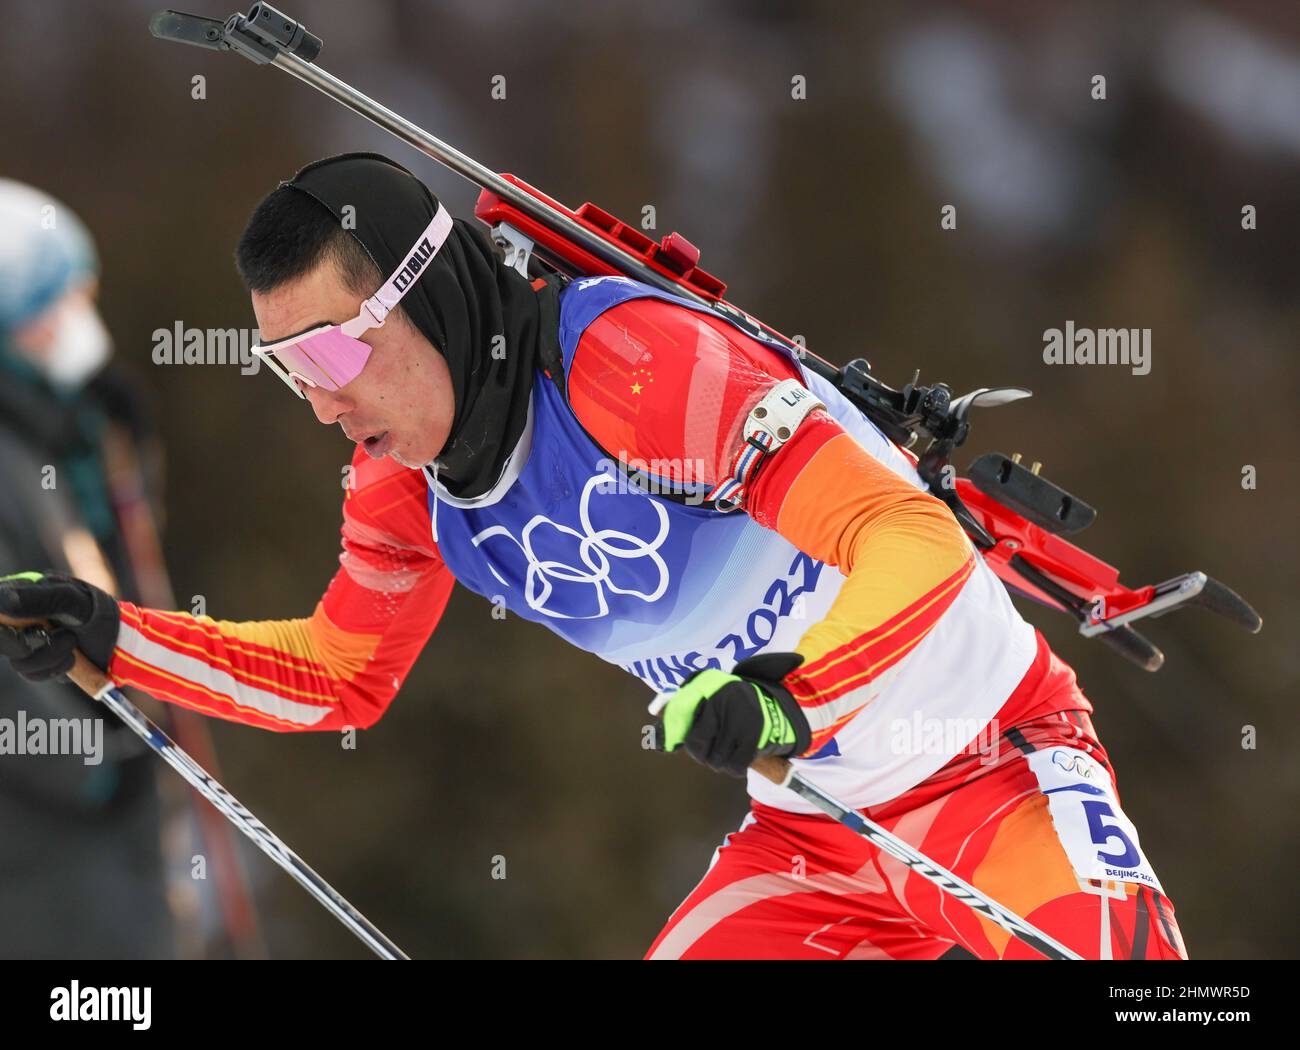 Zhangjiakou, China's Hebei Province. 12th Feb, 2022. Cheng Fangming of China competes during biathlon men's 10km sprint at National Biathlon Centre in Zhangjiakou, north China's Hebei Province, Feb. 12, 2022. Credit: Ding Ting/Xinhua/Alamy Live News Stock Photo